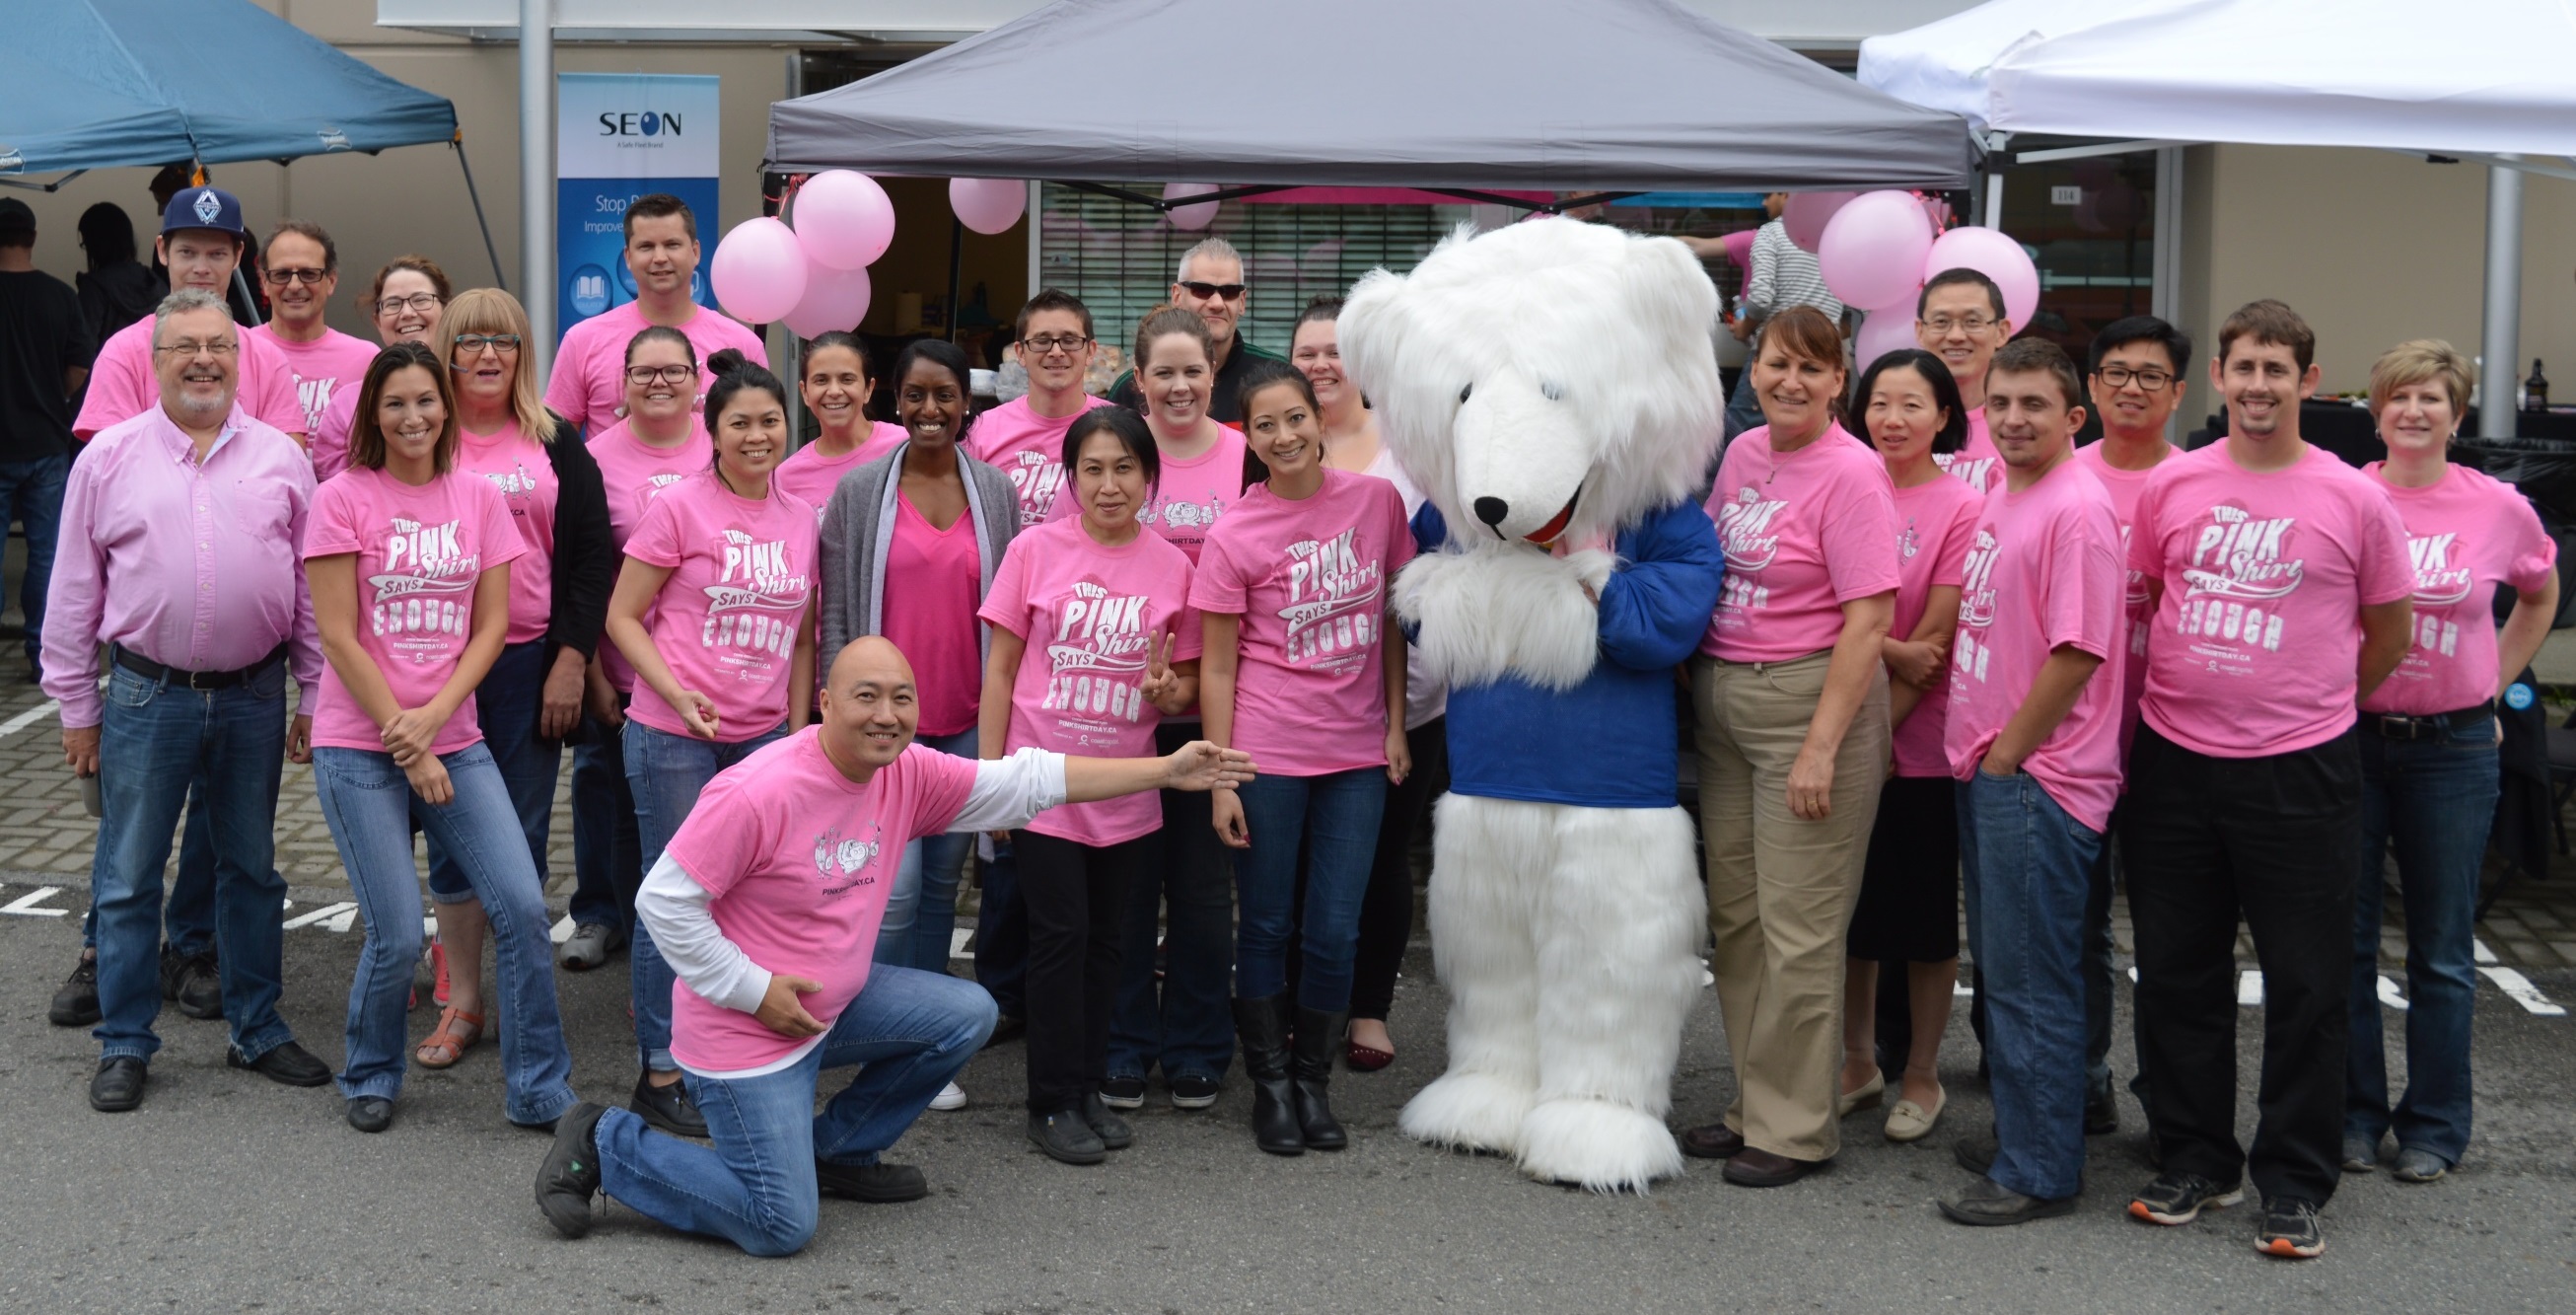 Seon’s Halfway to Pink Shirt Day BBQ Fundraiser Unites the Community